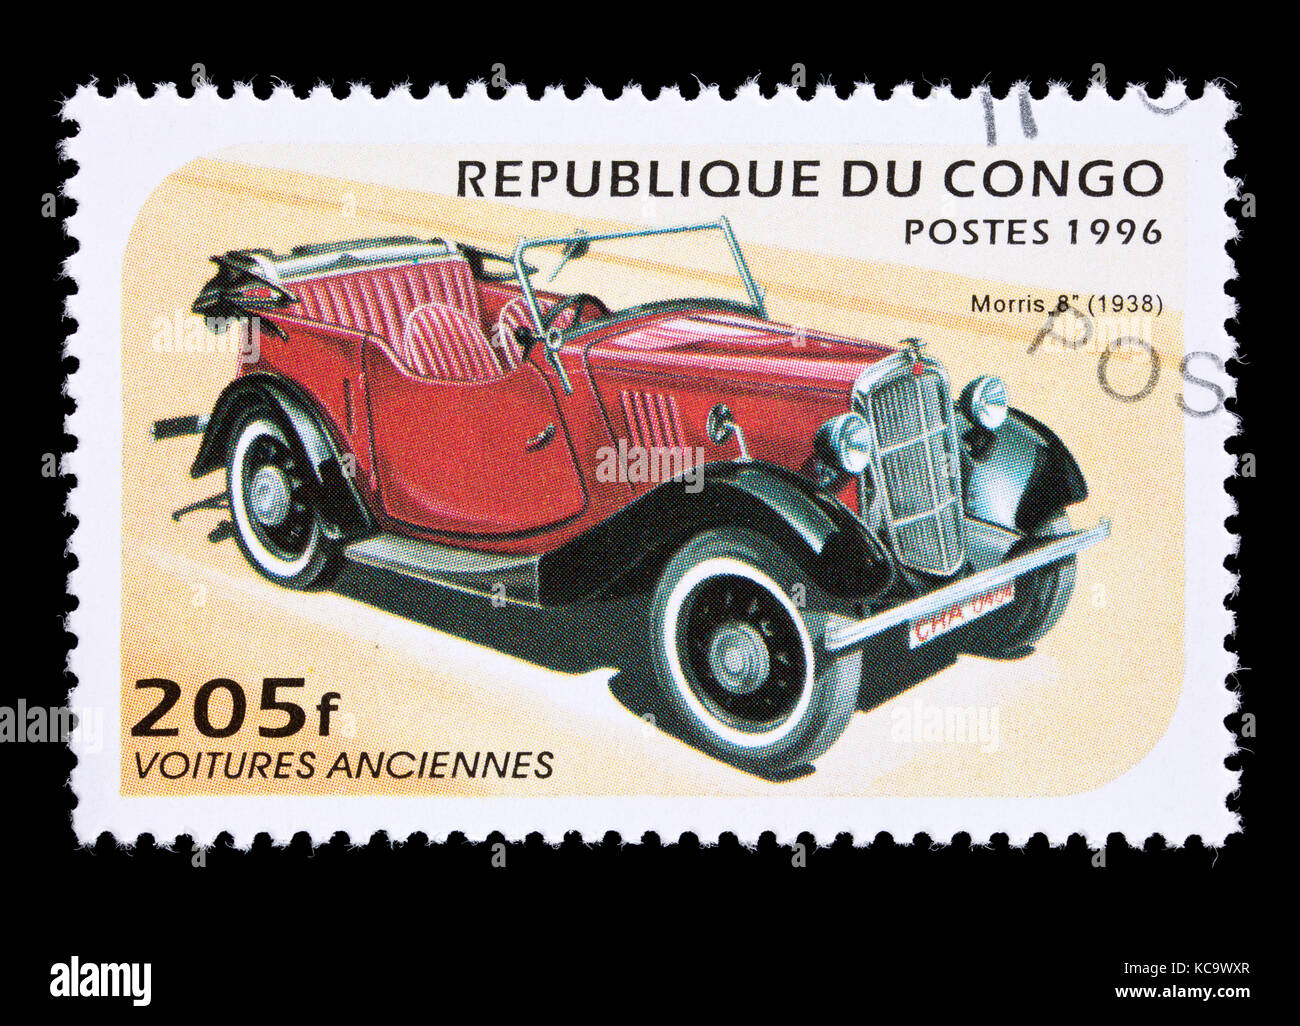 Postage stamp from the People's Republic of Congo depicting a 1938 Morris 8 Stock Photo